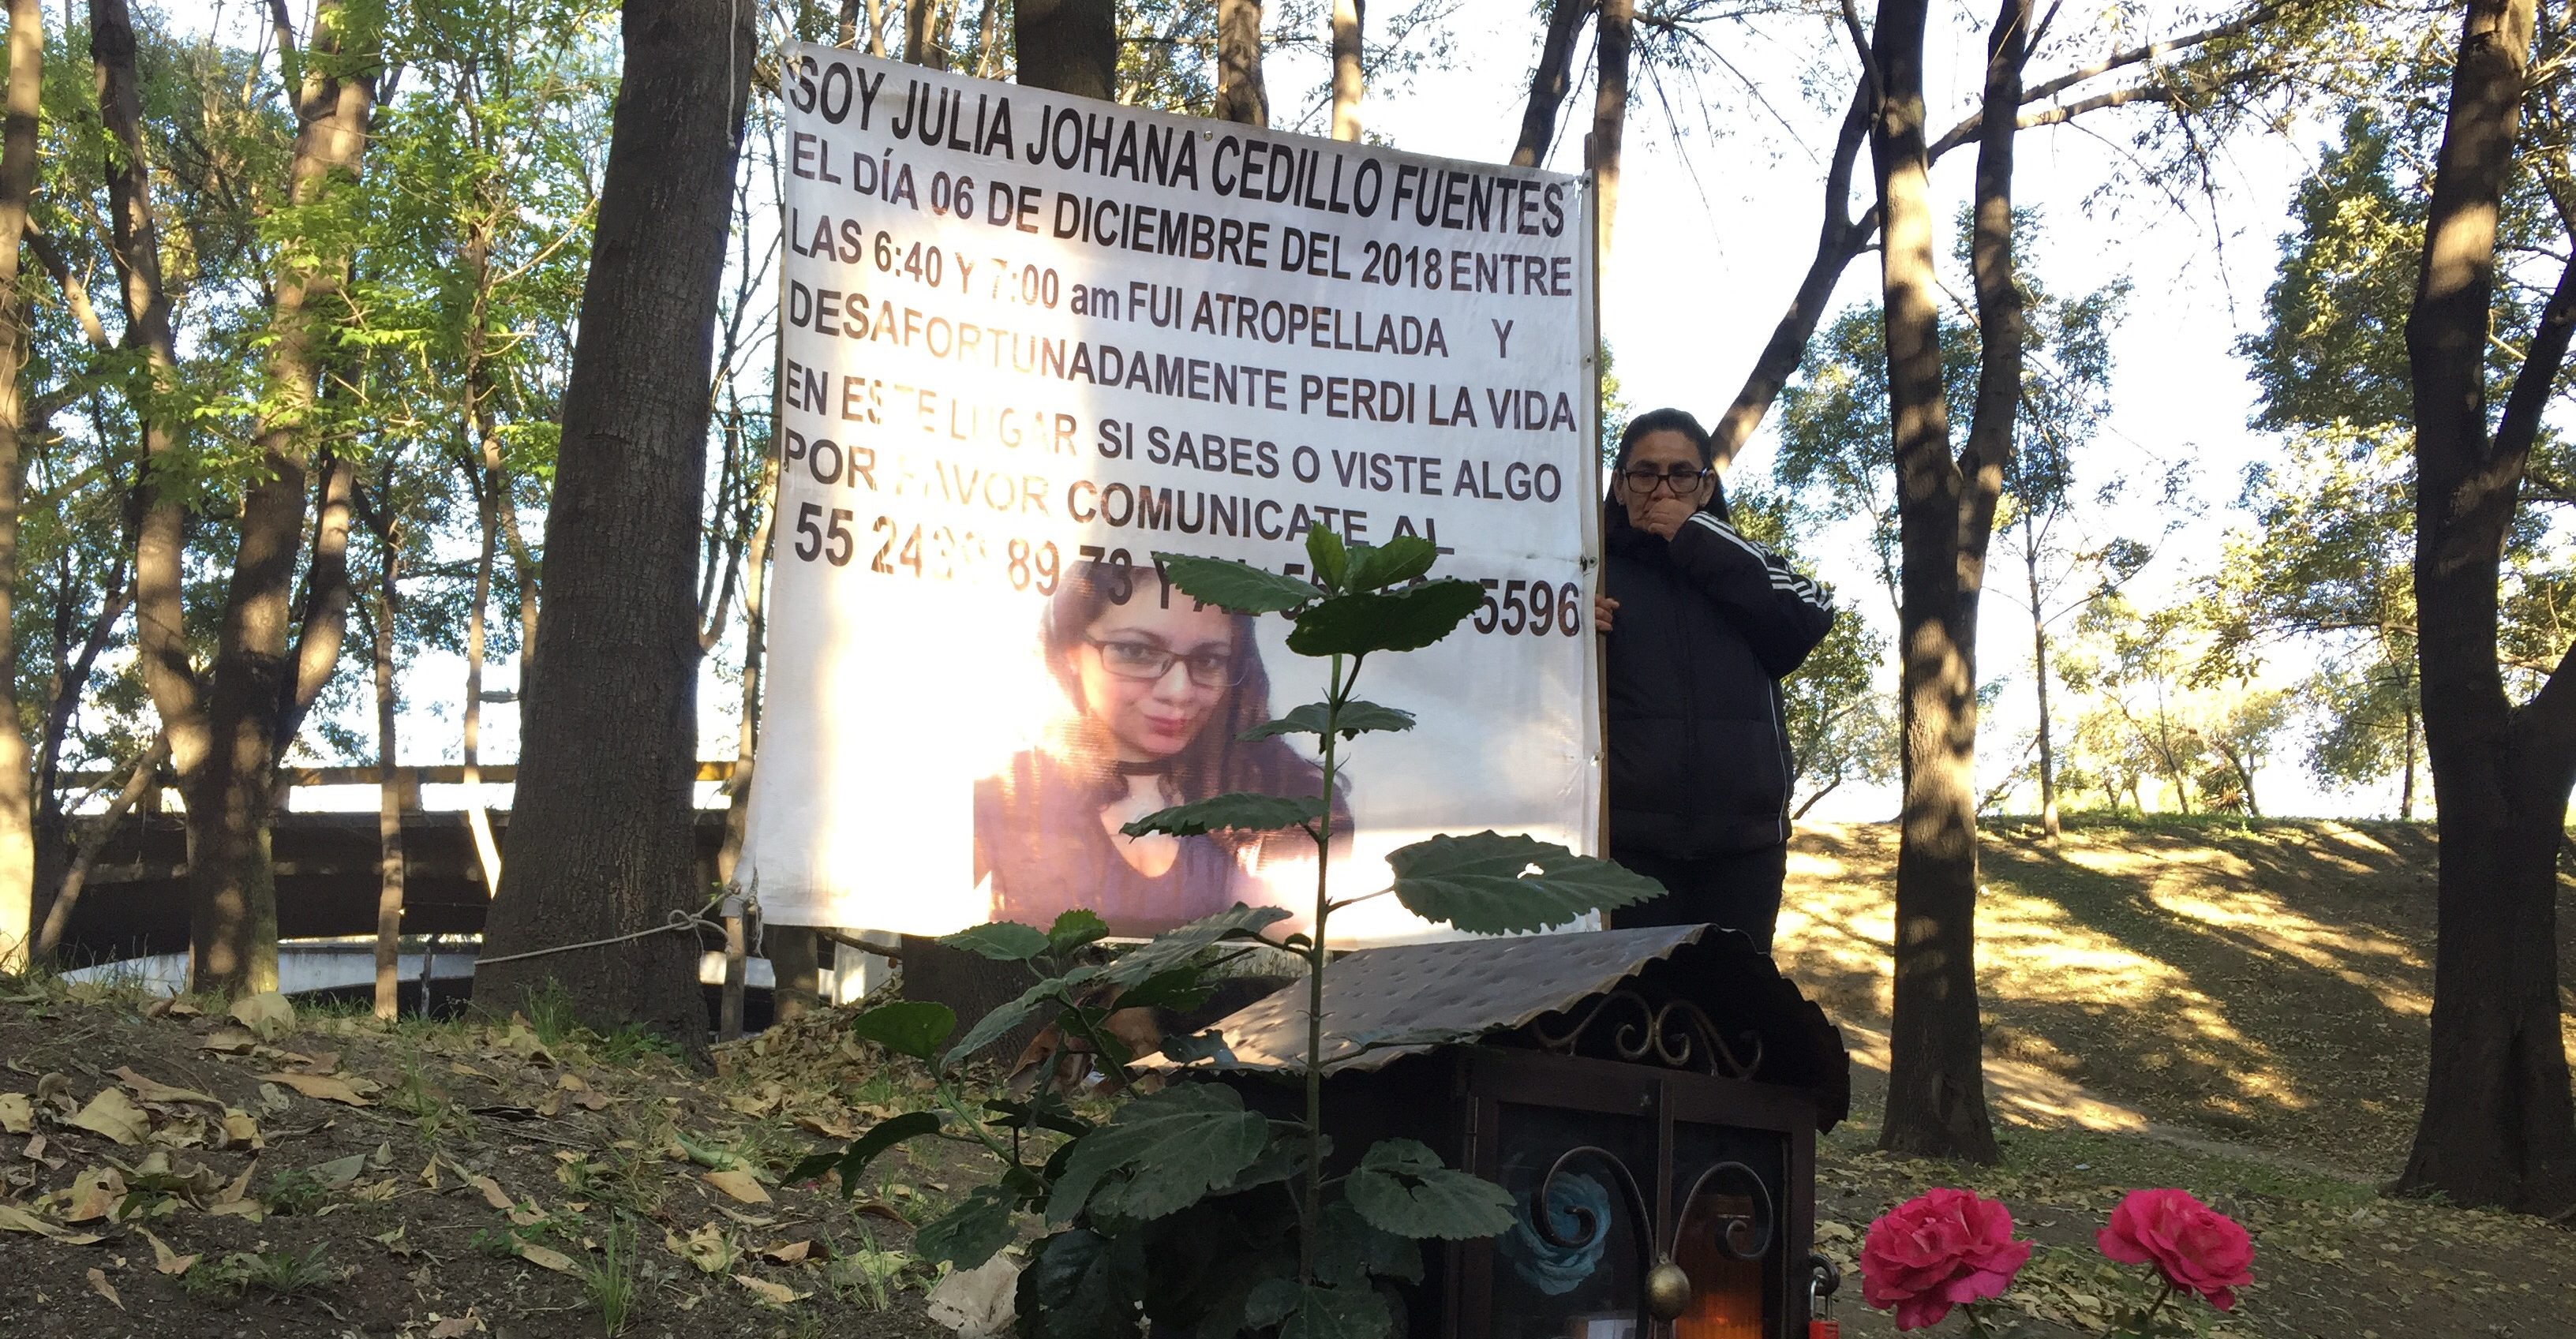 Johana was run over a year ago, her parents are still seeking justice